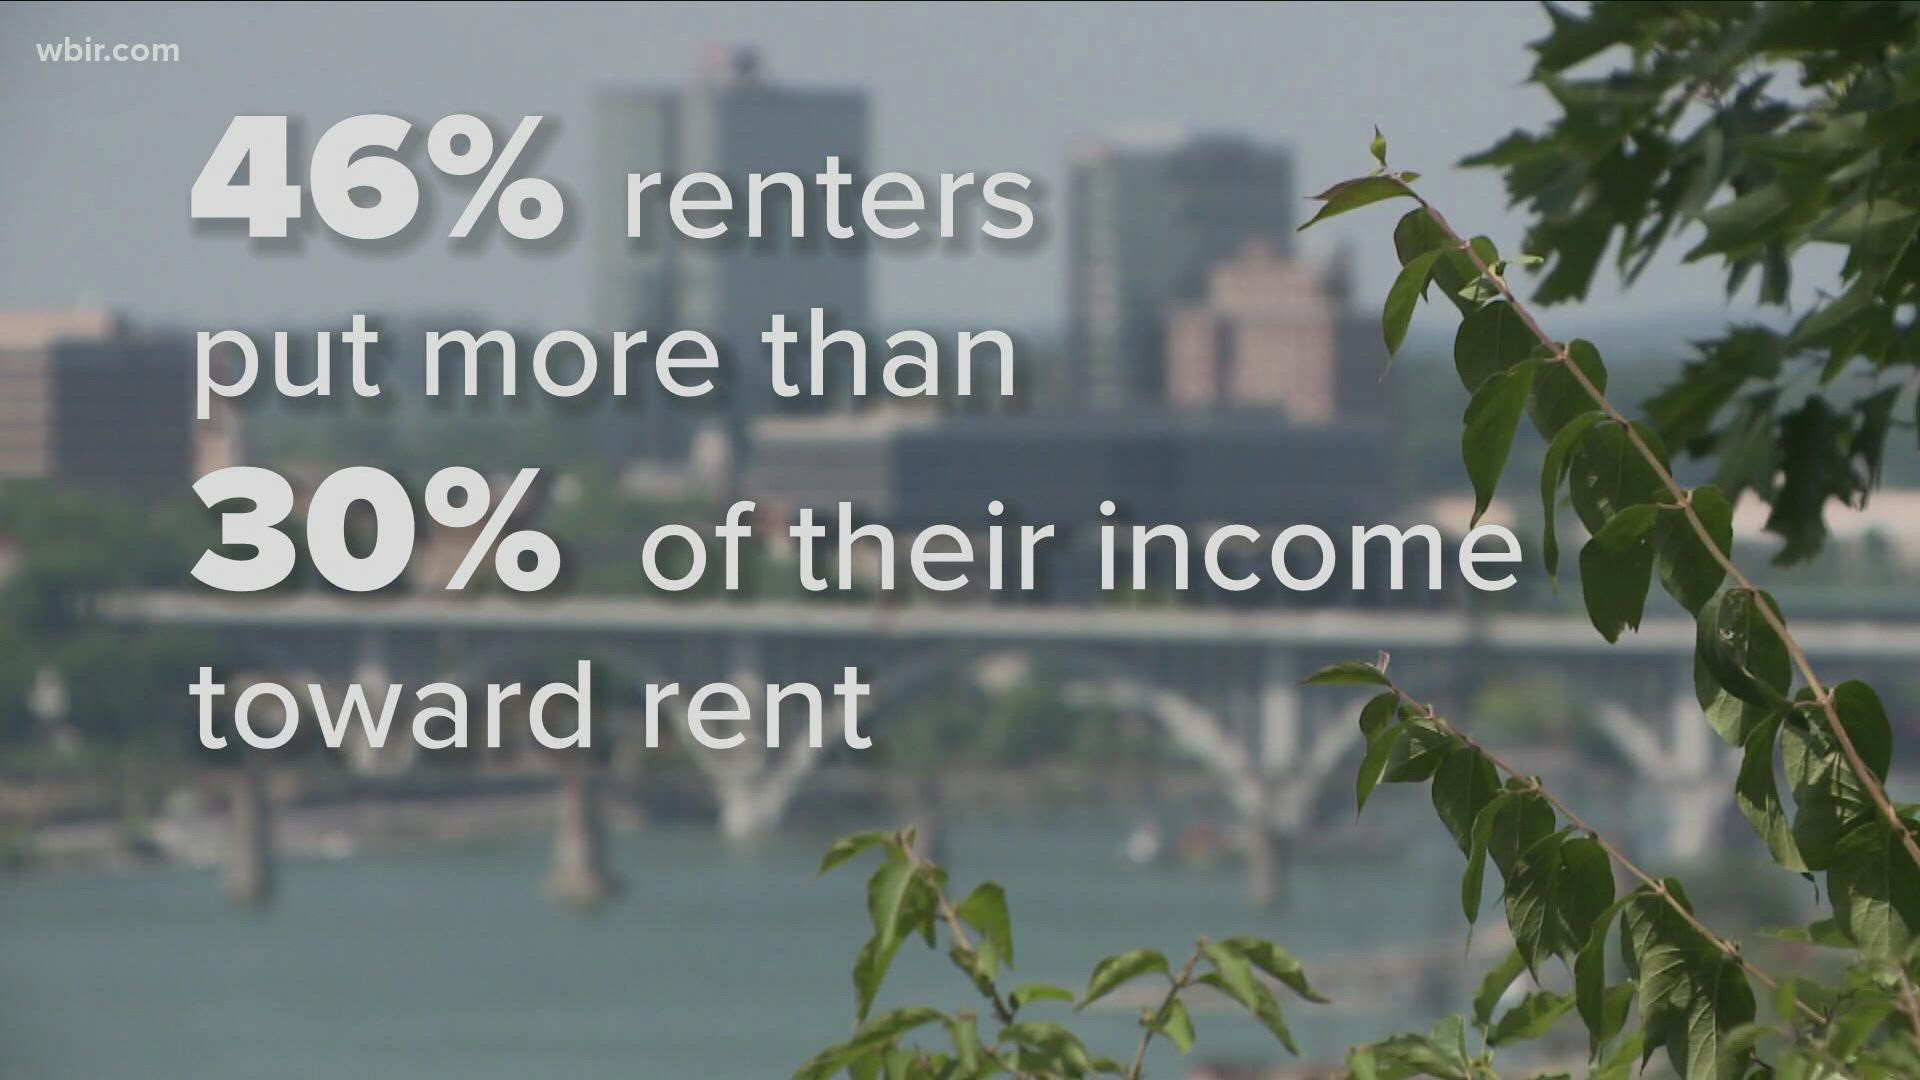 More than 46% of Knoxville's renters have a cost burden, where they're putting around a third of their income toward rent.